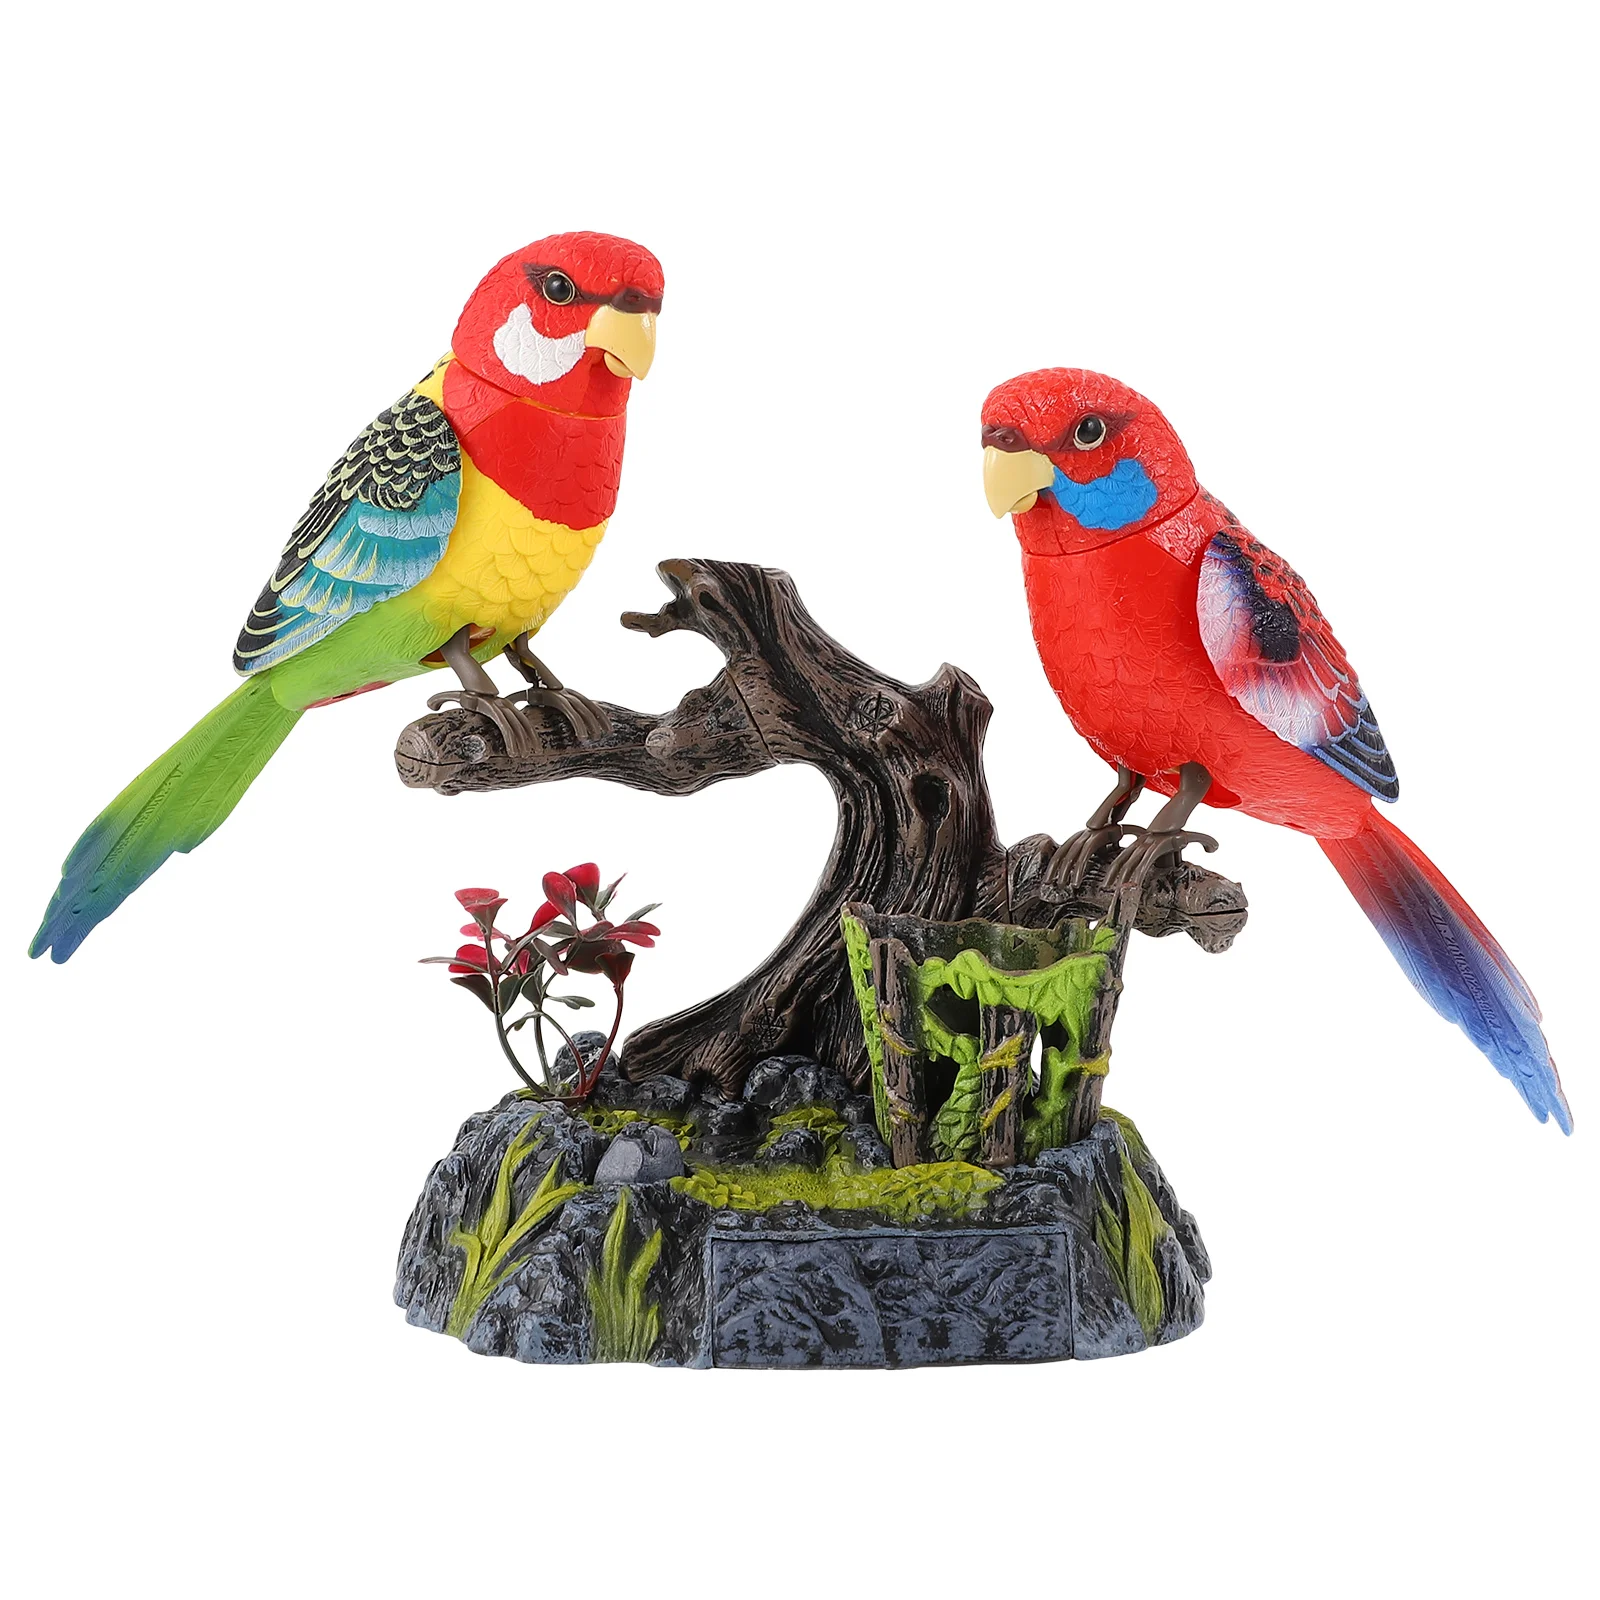 

Toy Talking Parrot Bird Birds Animal Recording Electronic Electric Toys Pets Parrots Record Speaking Early Repeating Voice